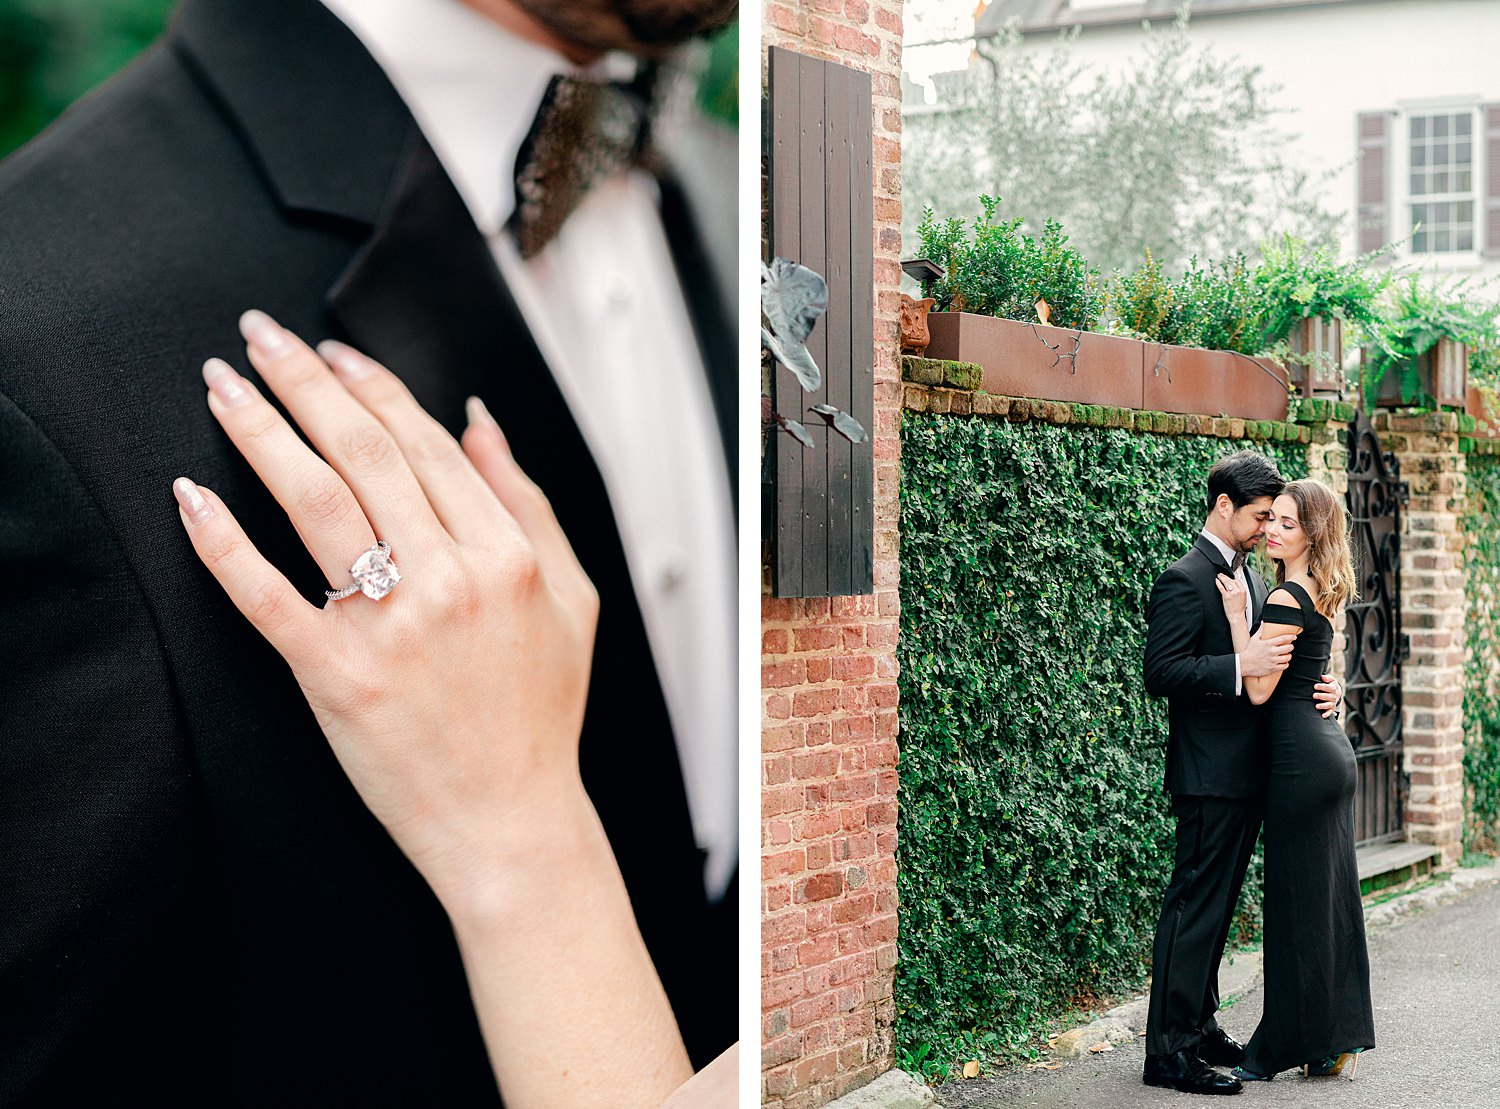 Man in tuxedo embracing girl in black dress in front of red brick and green plants